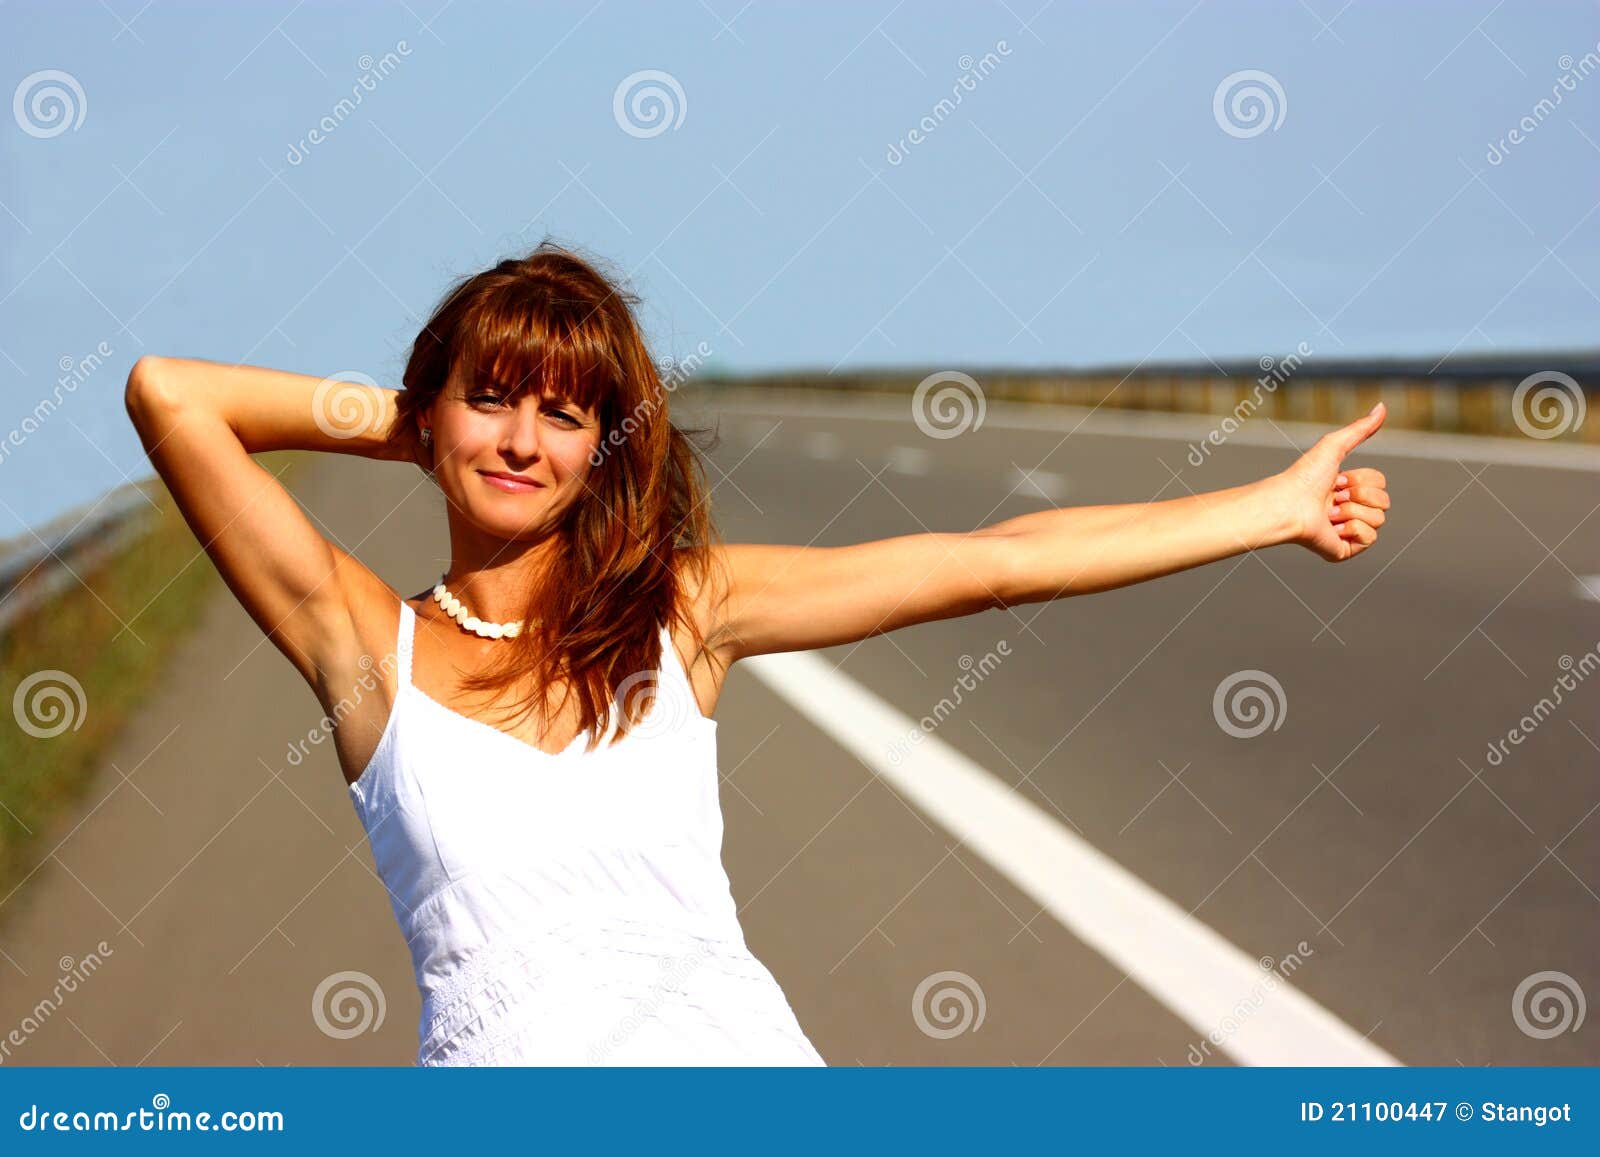 Woman Hitchhiking Stock Image Image Of Autostop Hitchhiker 21100447